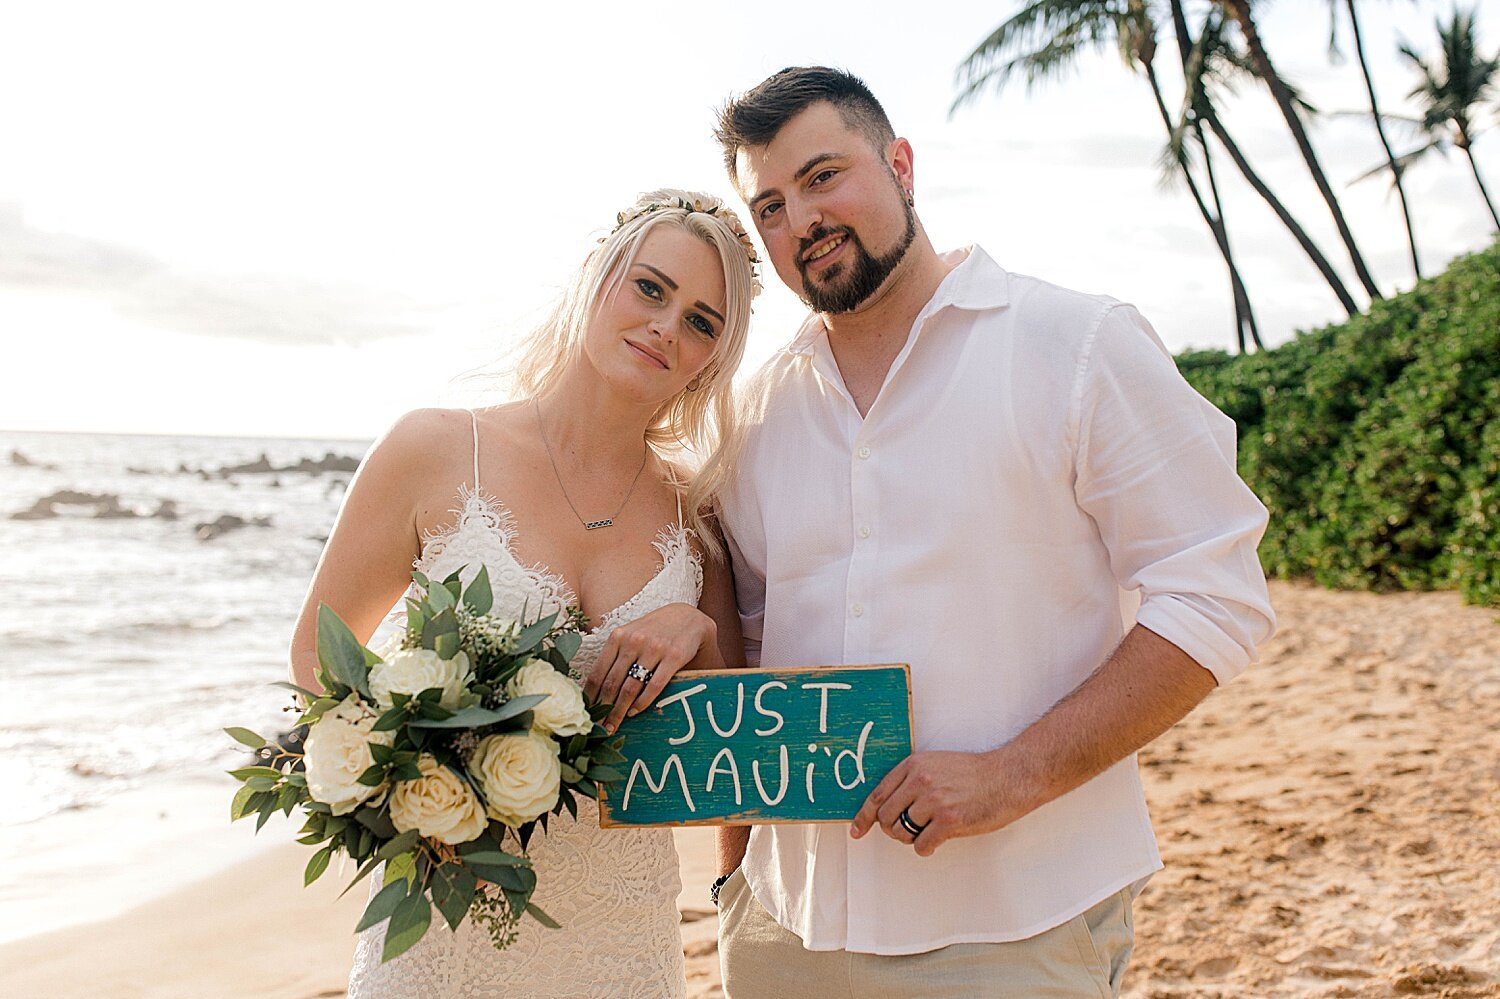 Bride and groom posing with "Just Mauid" sign following Maui beach elopement ceremony